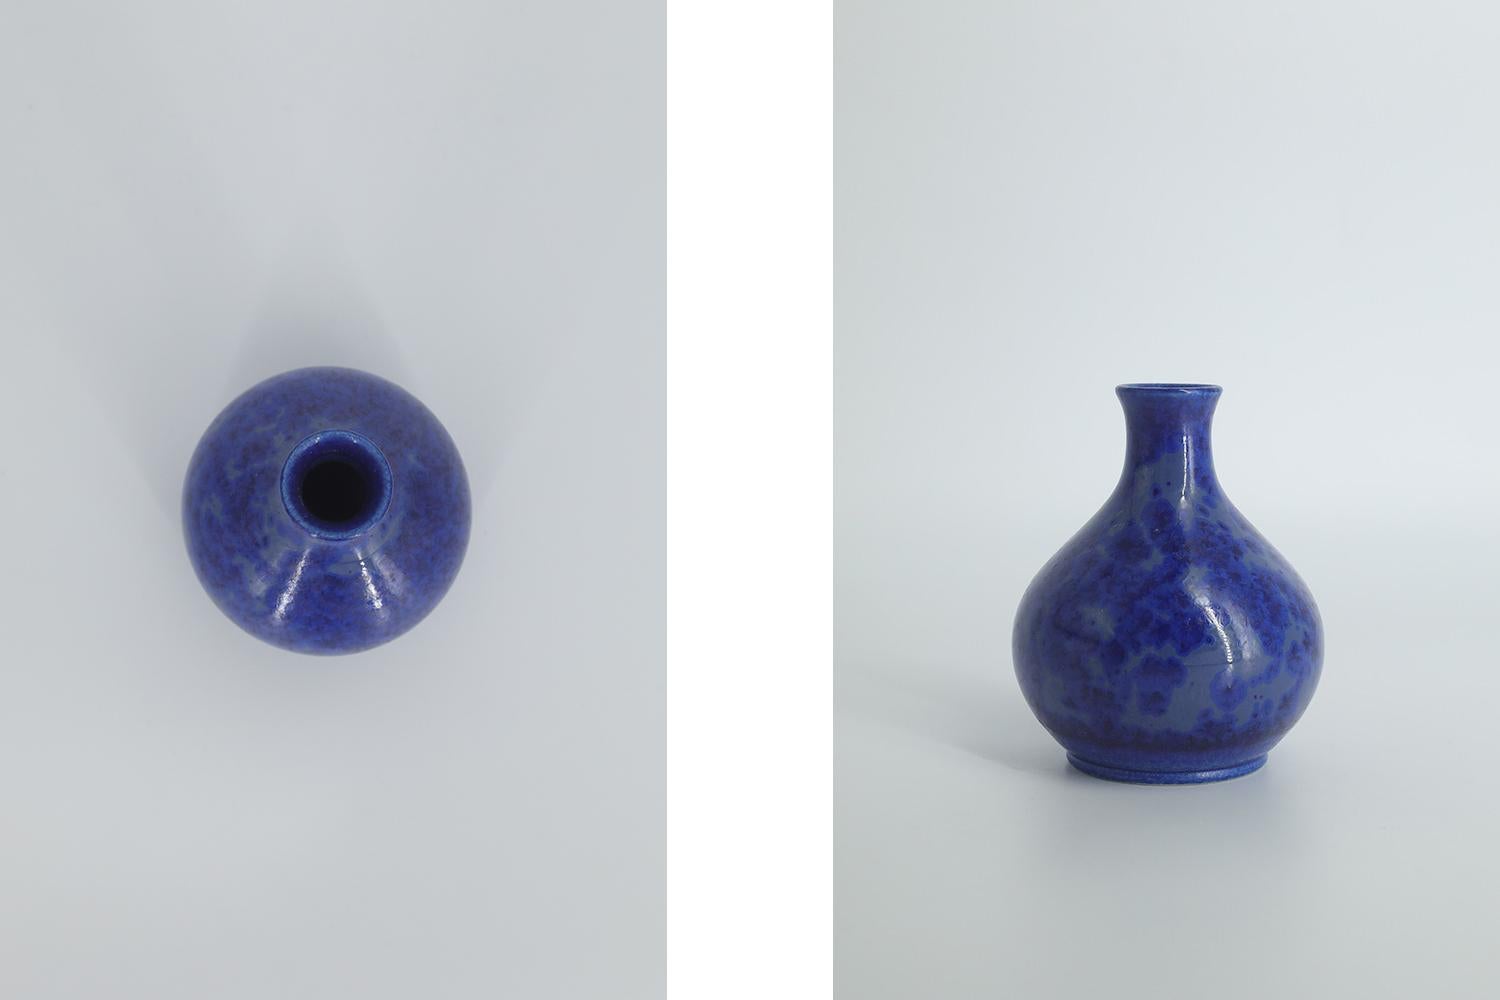 This miniature, collectible stoneware vase was designed by Gunnar Borg for the Swedish manufacture Höganäs Keramik during the 1960s. Handmade by a Master, with the utmost care and attention to details. The sapphire-gray colored vase with irregular